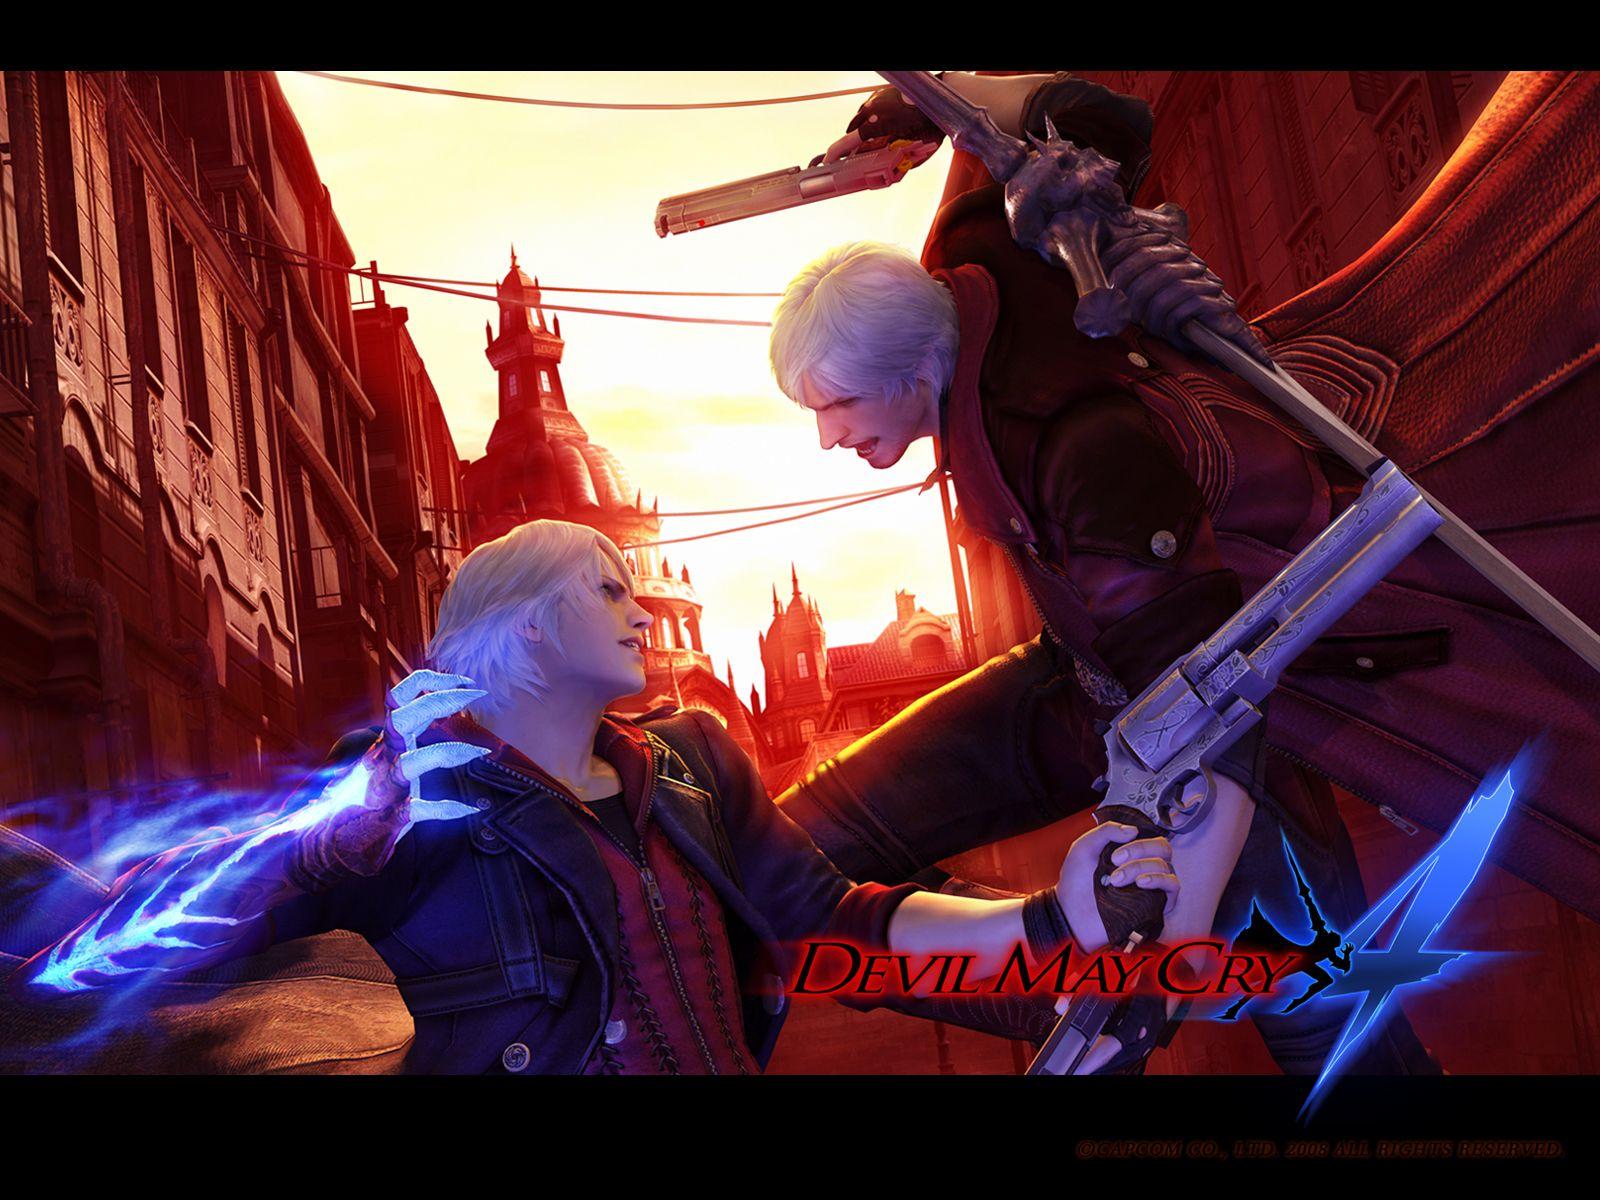 Dante and Nero May Cry 4